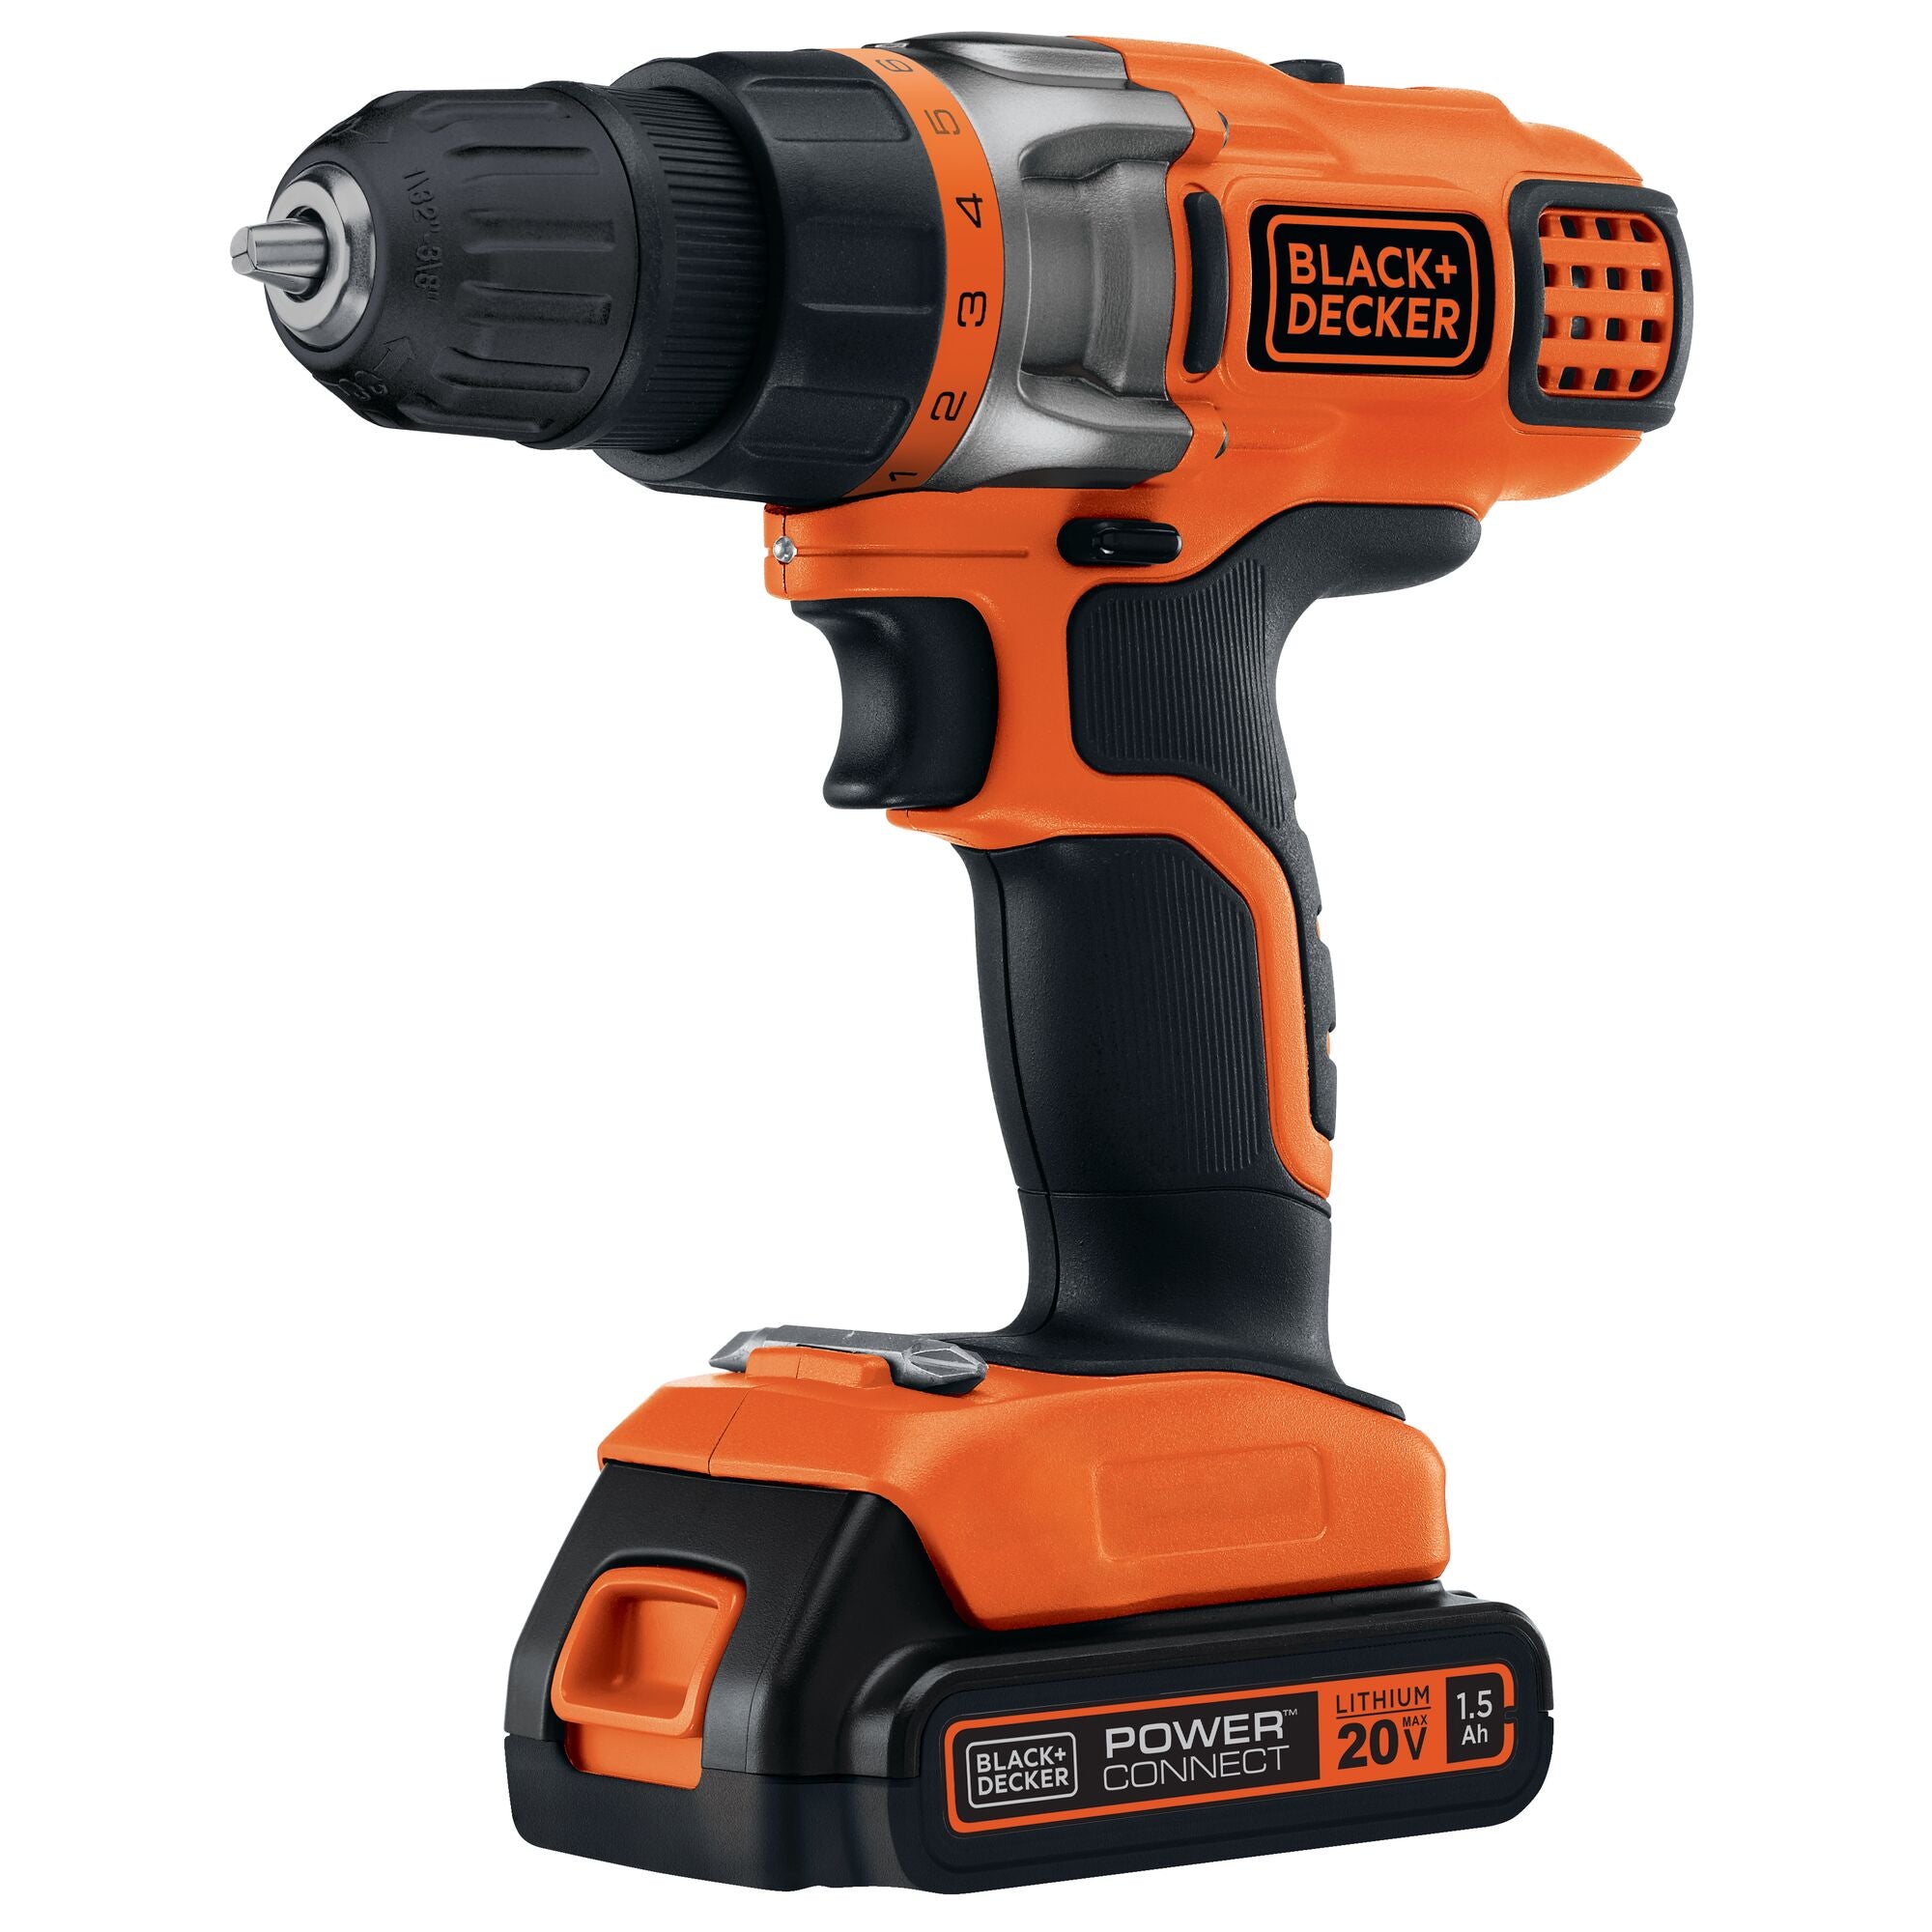 BLACK+DECKER 20V MAX Lithium-Ion Cordless Matrix Drill/Driver, (1) 1.5Ah  Battery, and Charger BDCDMT120C - The Home Depot